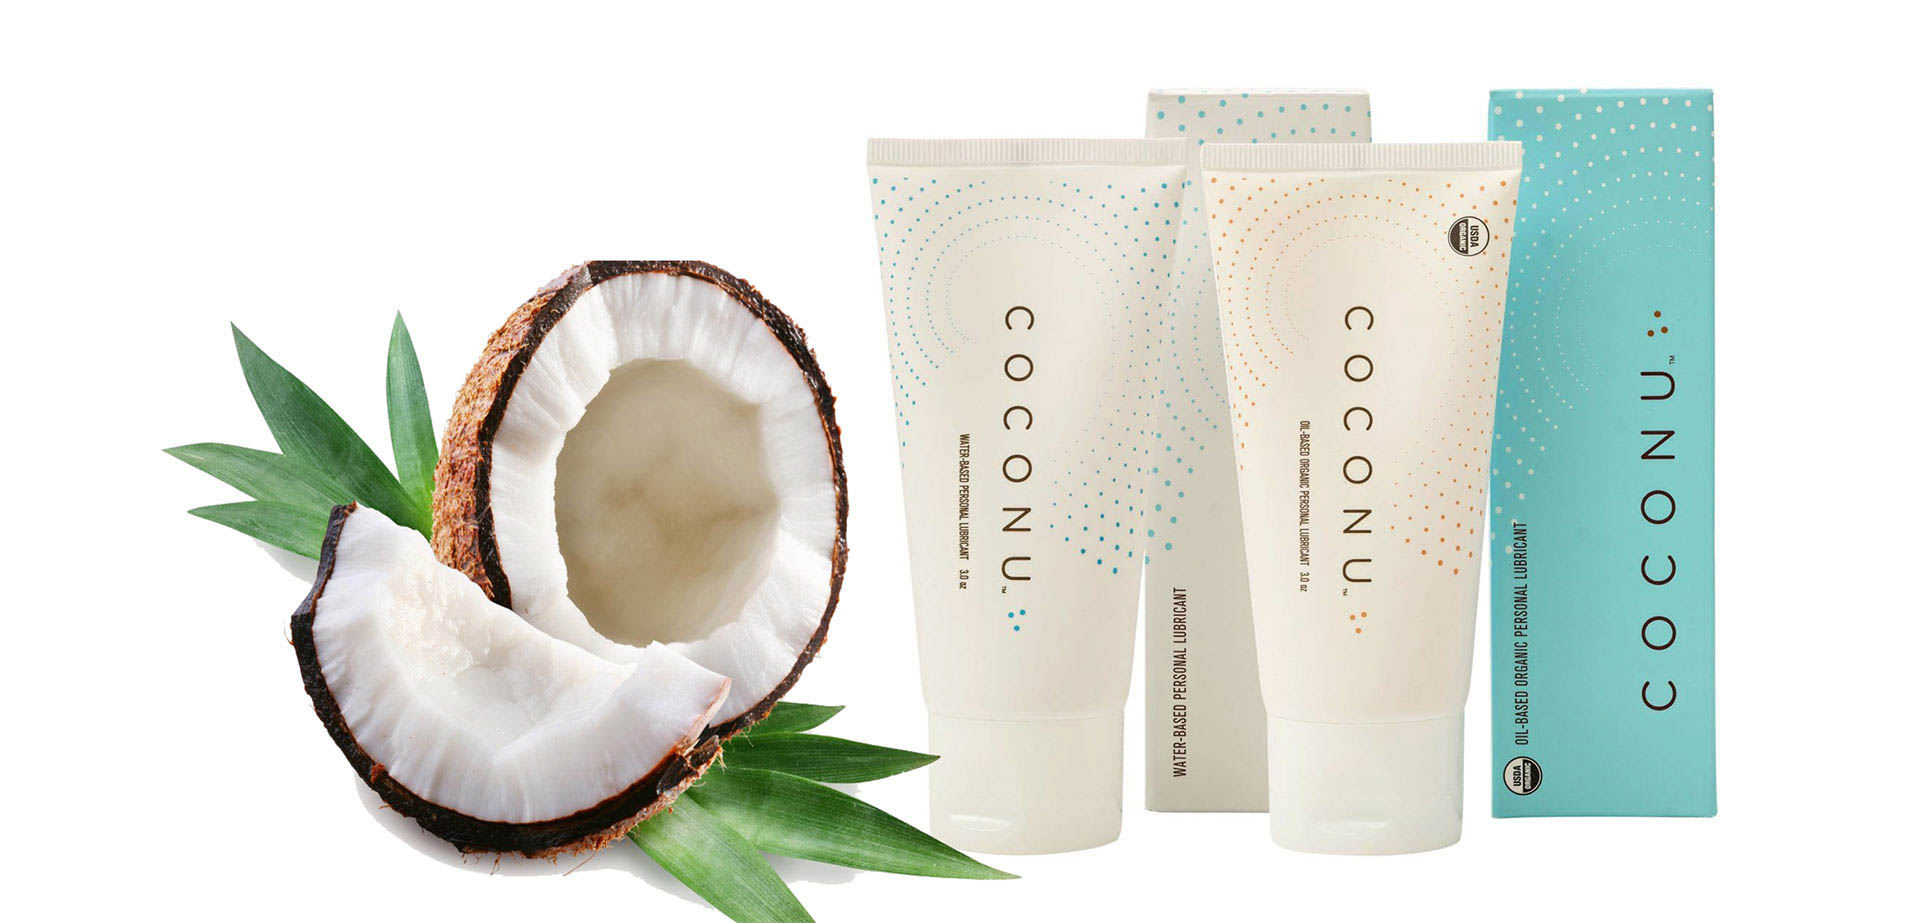 Coconu Oil Based Natural Lubricants.